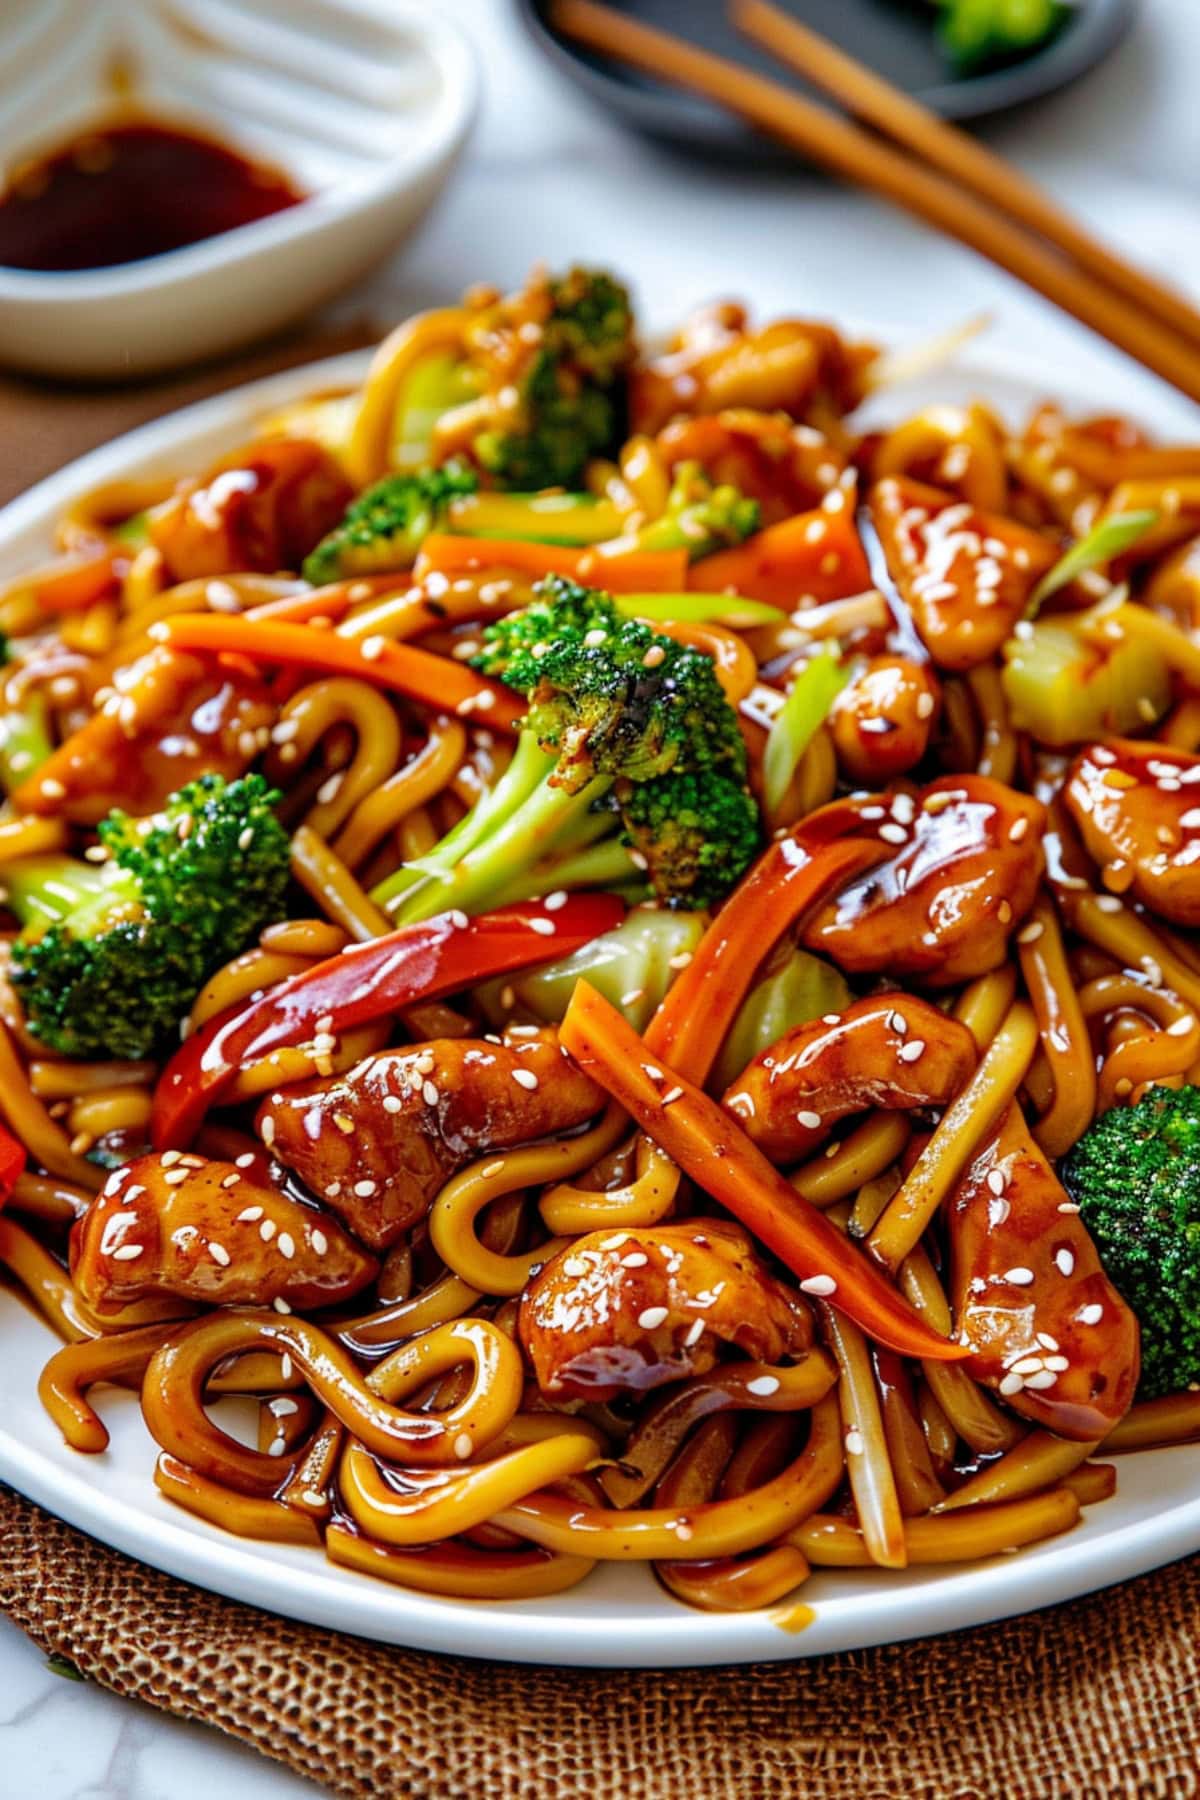 Chicken teriyaki noodles with udon, carrots, broccoli and chicken served on a white plate with chopsticks on the side.